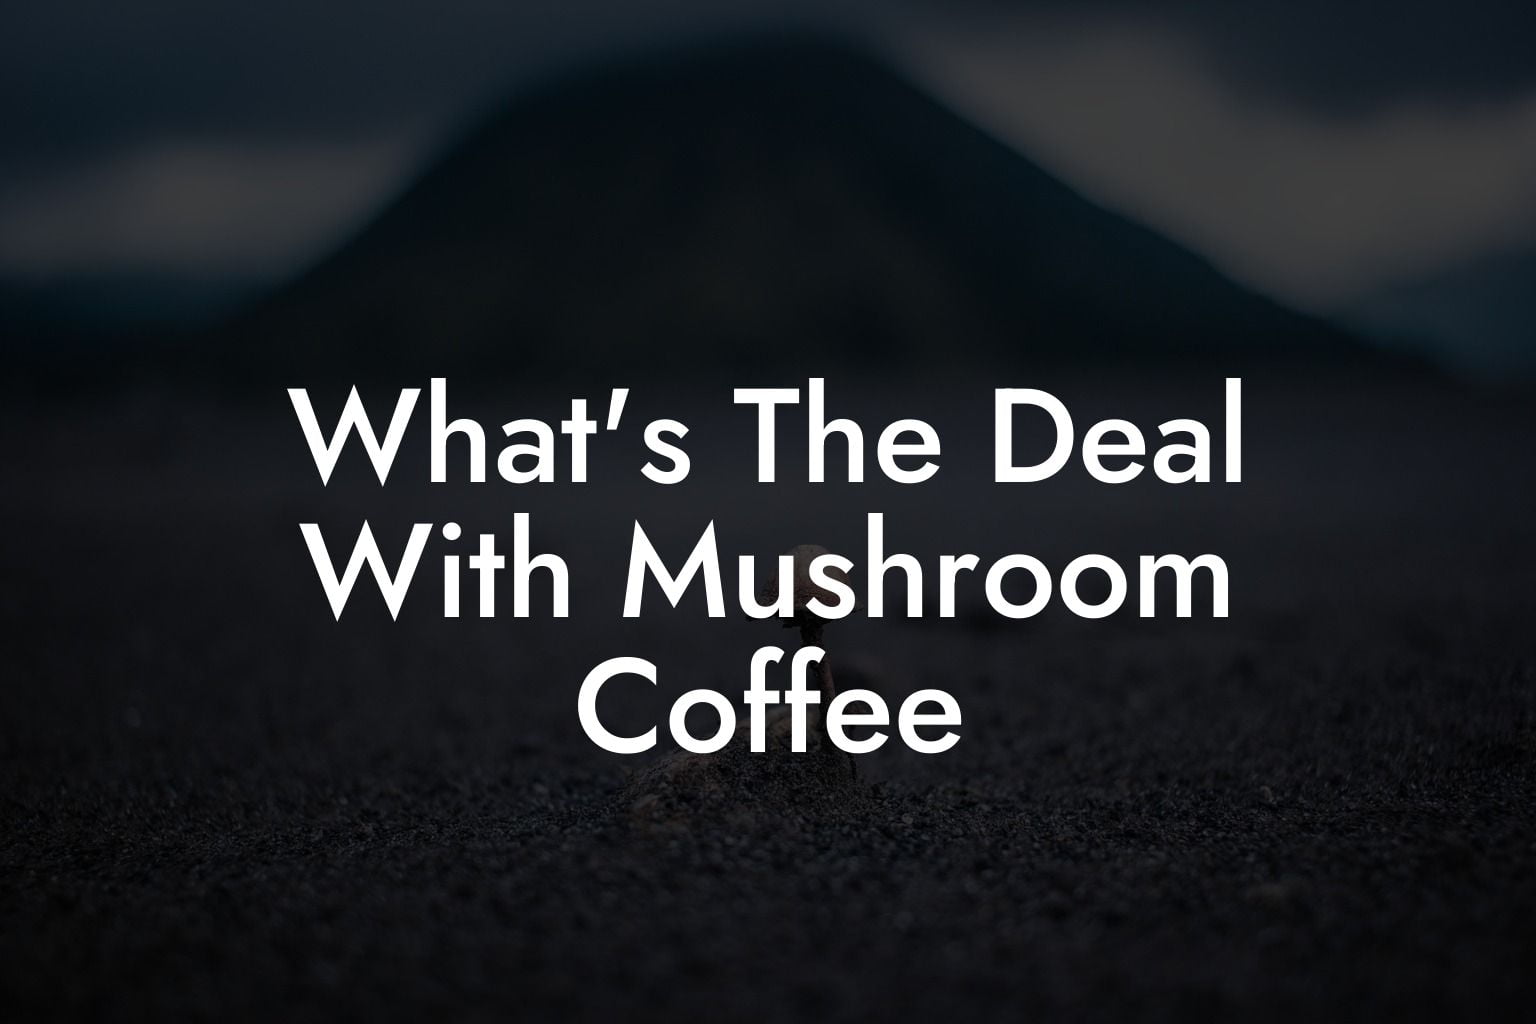 What's The Deal With Mushroom Coffee